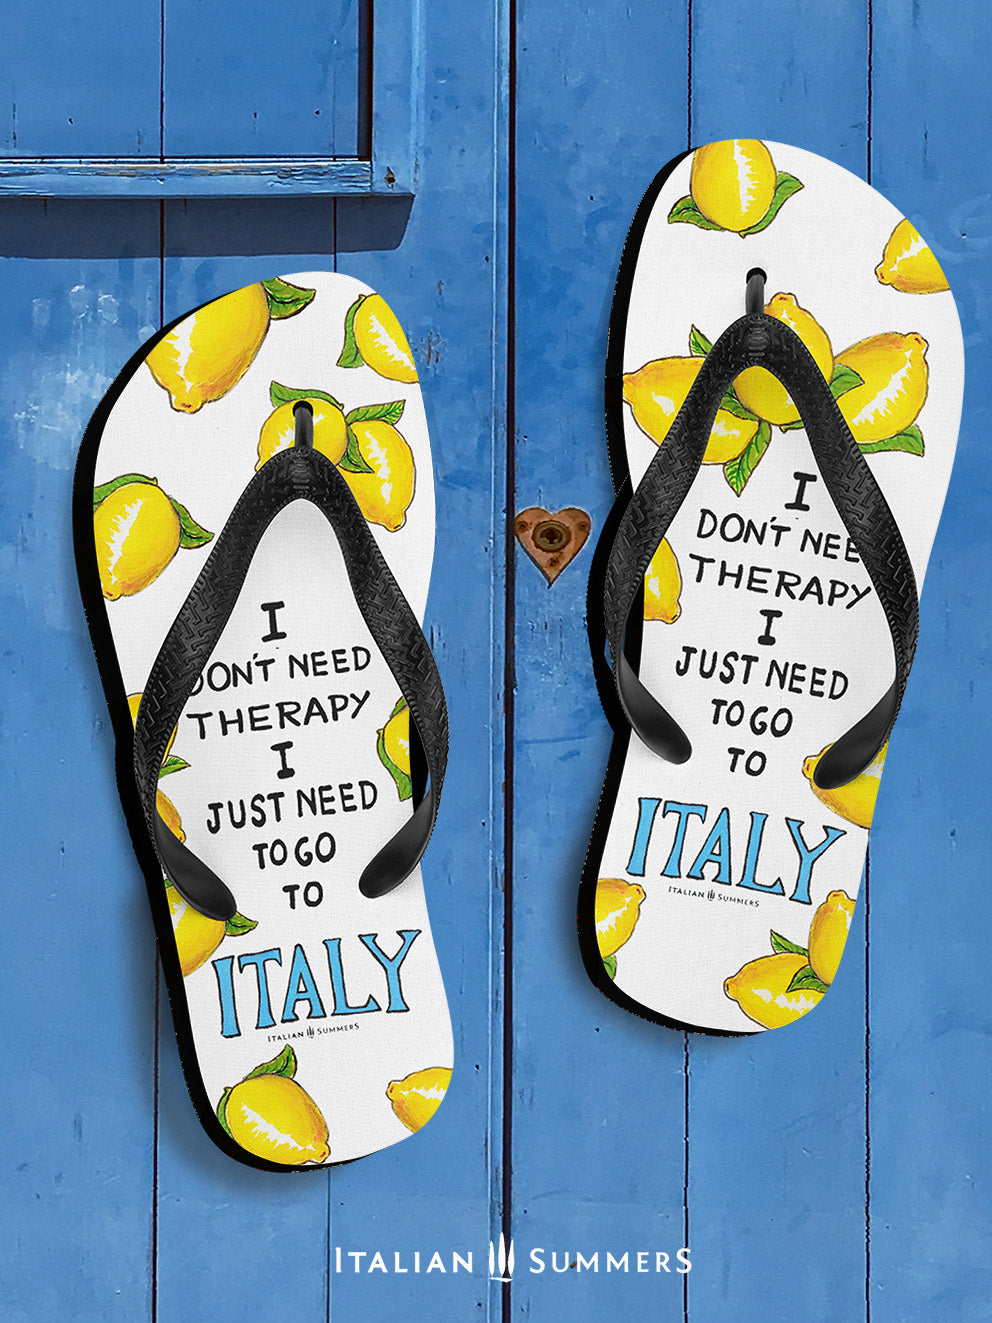 Italy flip flops I don't need therapy, I just want to go to Italy! The cutest flip flops of the beach. White flip flops with blach straps. The white base shows happy Italian lemons with the Italy therapy quote. Made by Italian Summers.